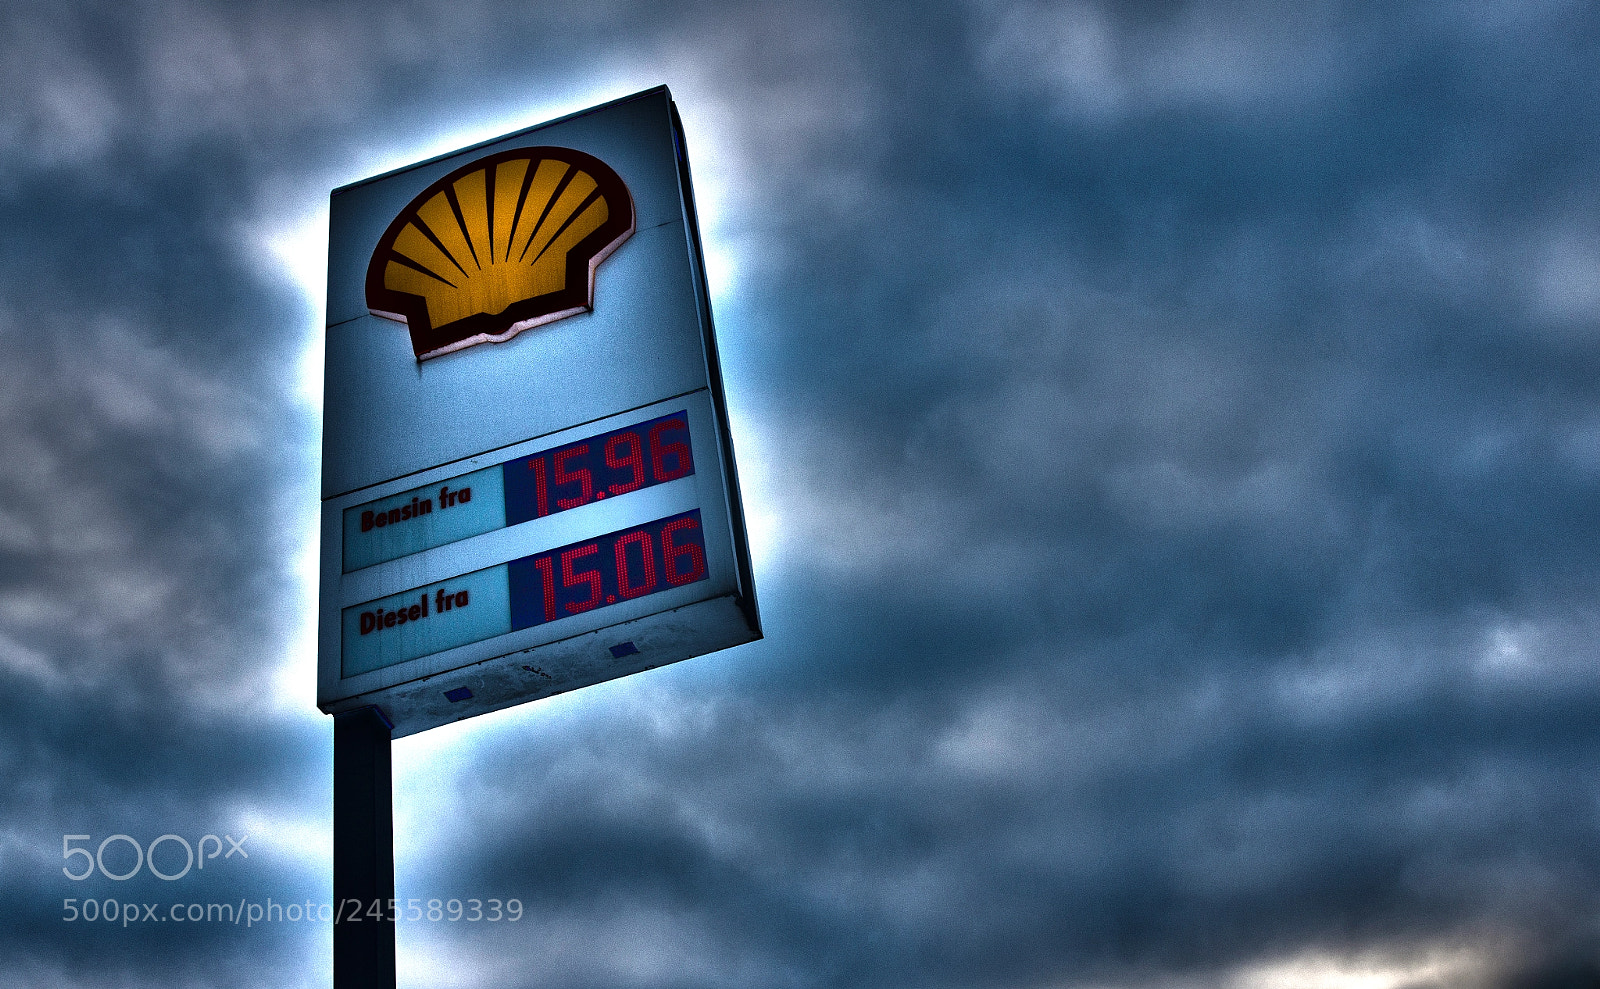 Canon EOS 60D sample photo. Shell's fuel price board photography